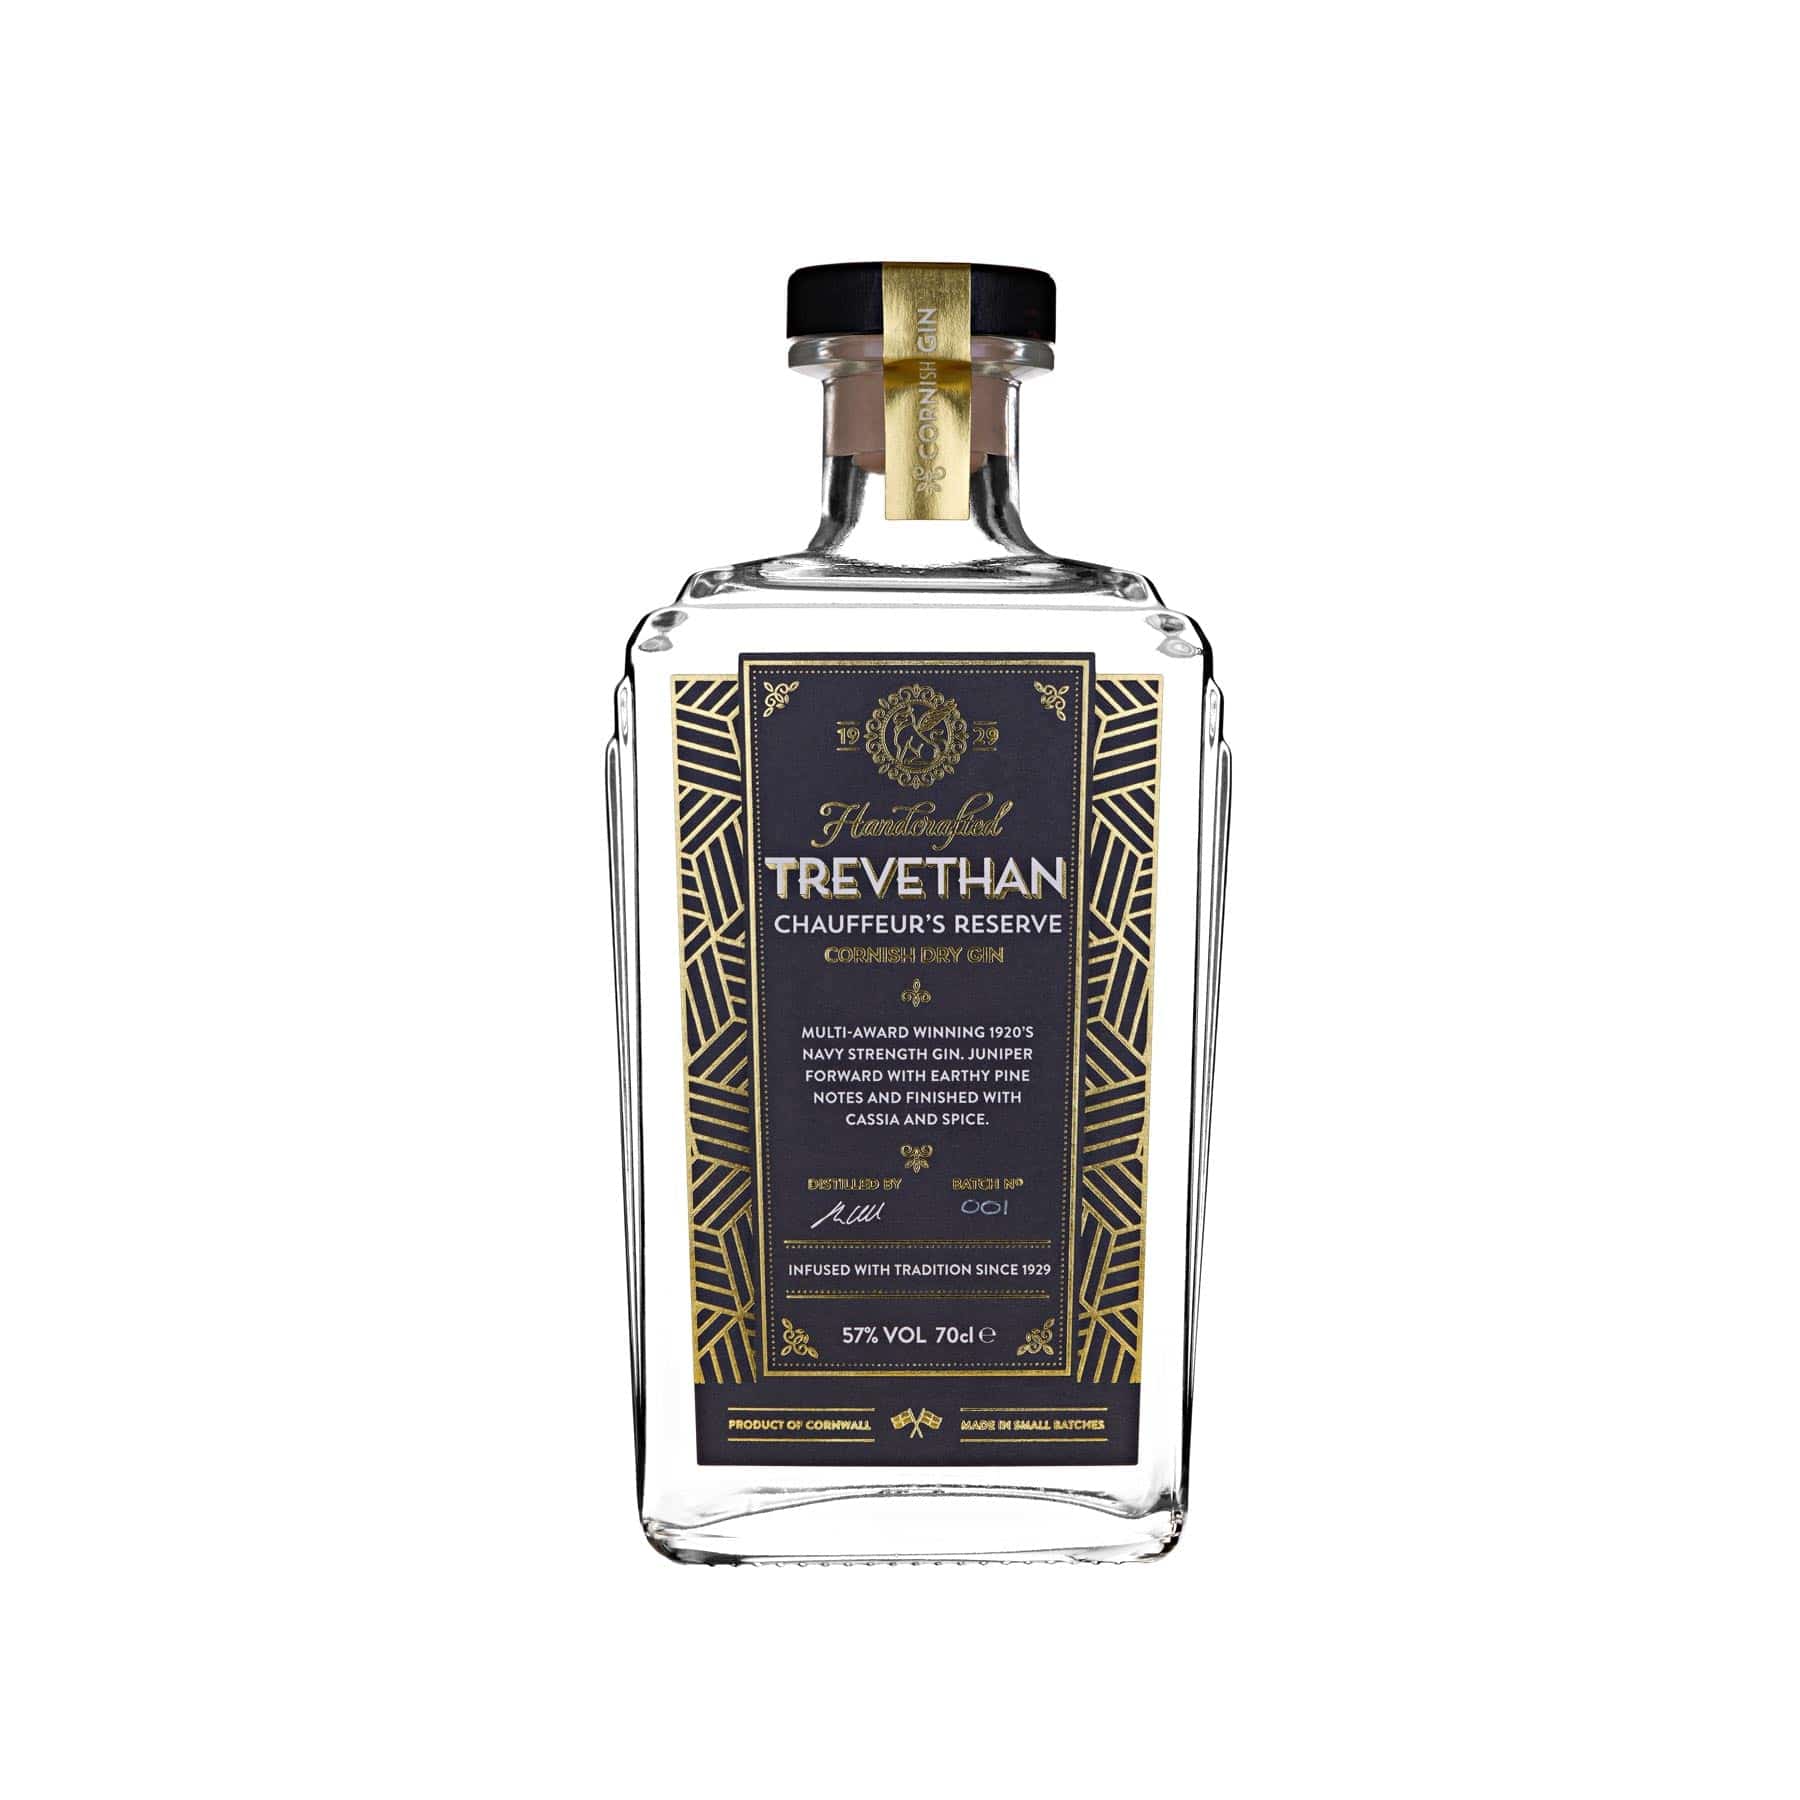 Chauffeur's reserve gin 70cl